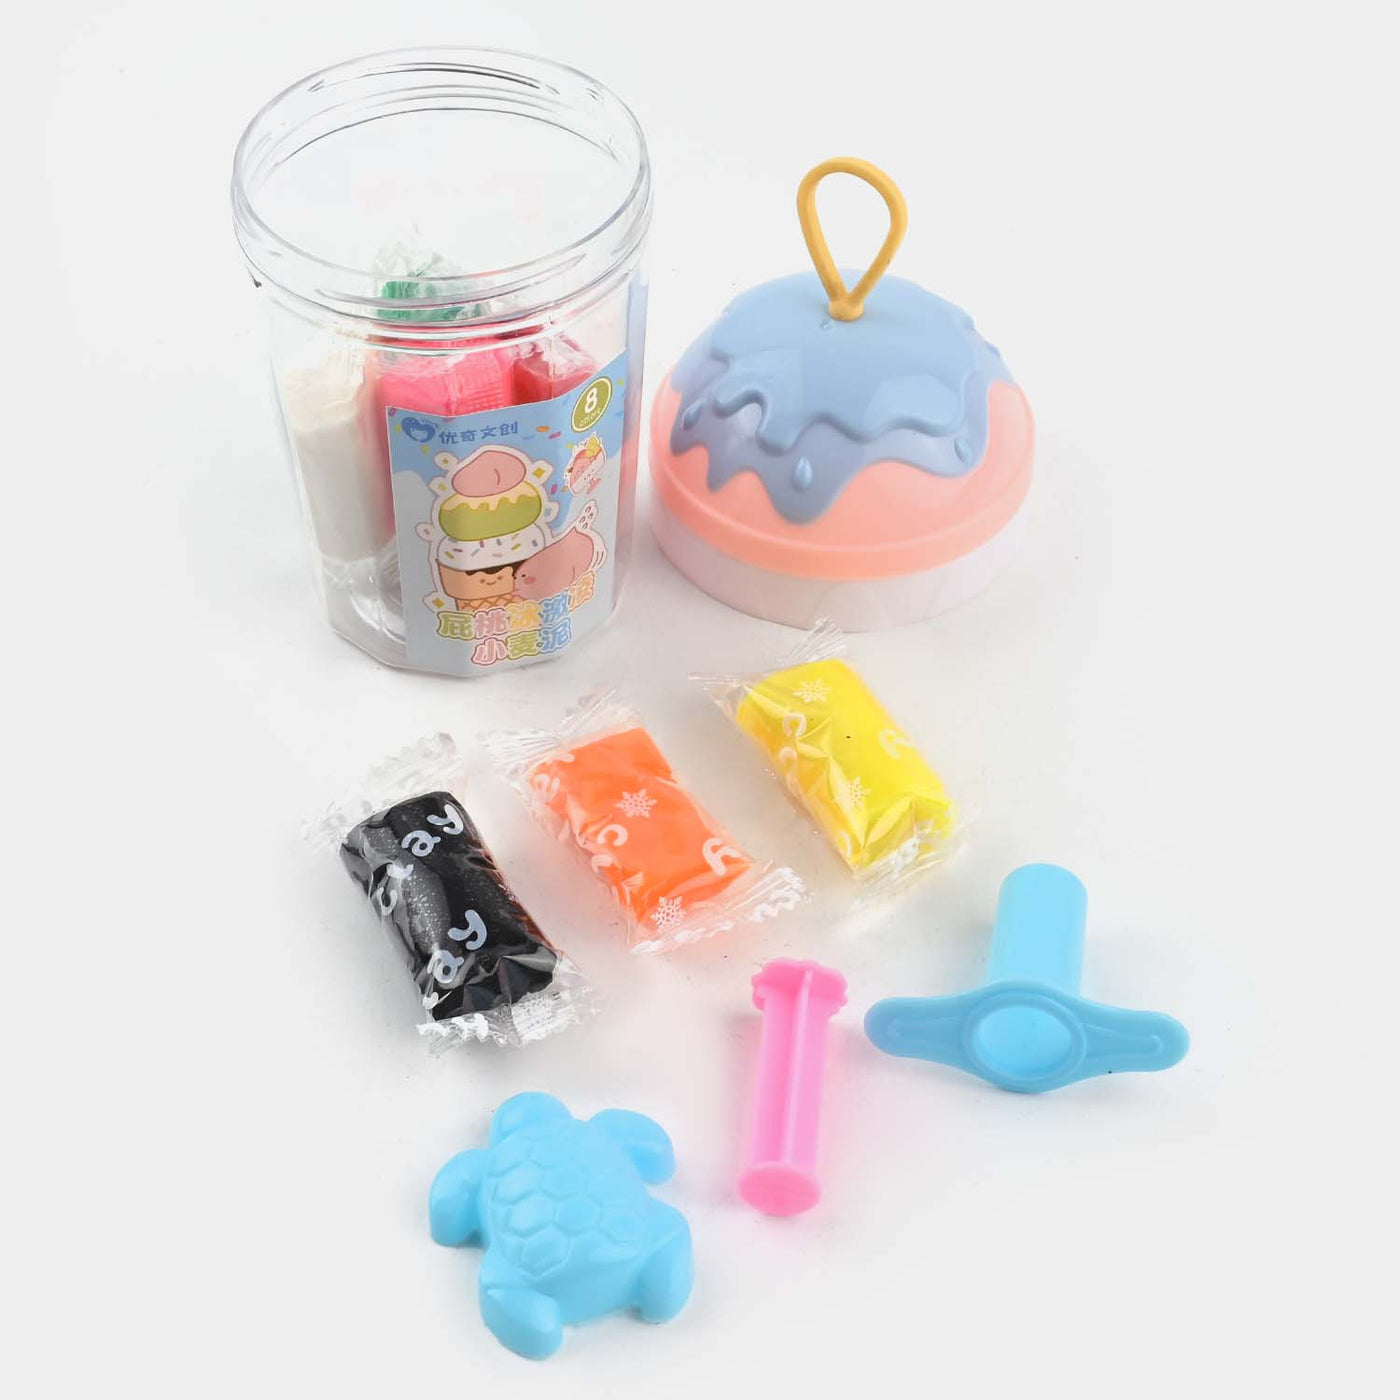 Clay Play Set For Kids